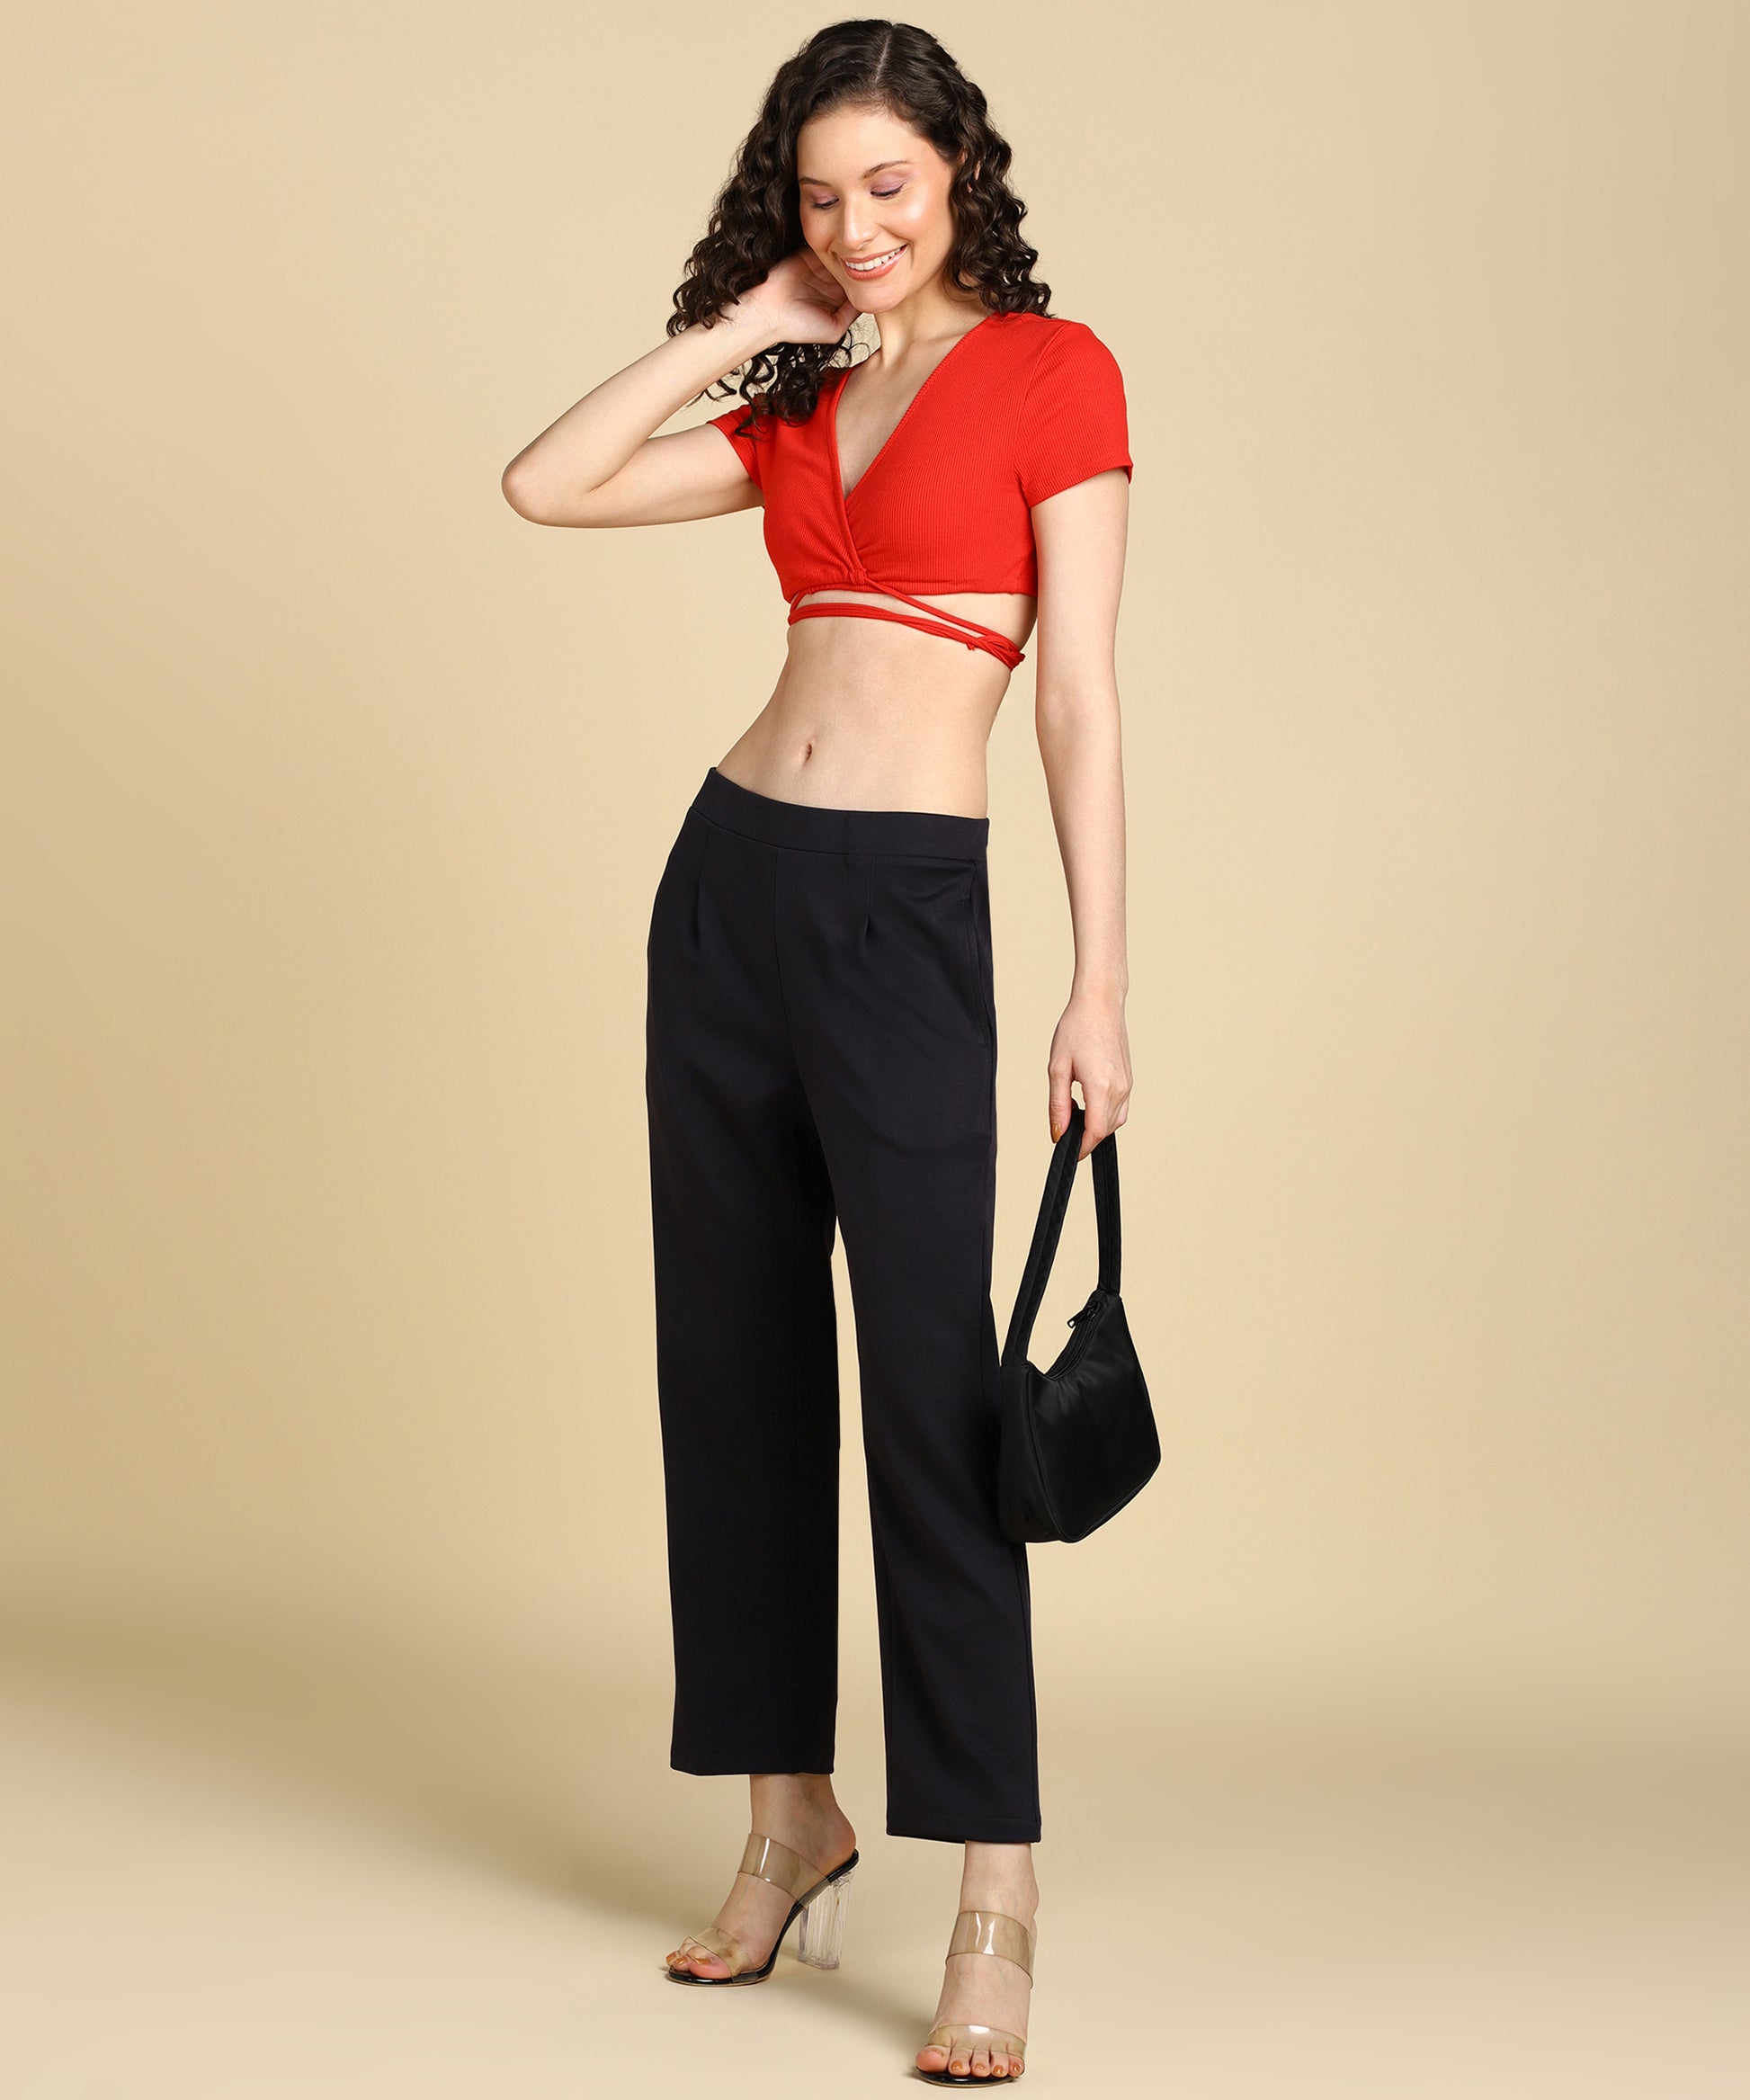 Women's High Waist Formal Stretchable Relaxed Parallel Trouser